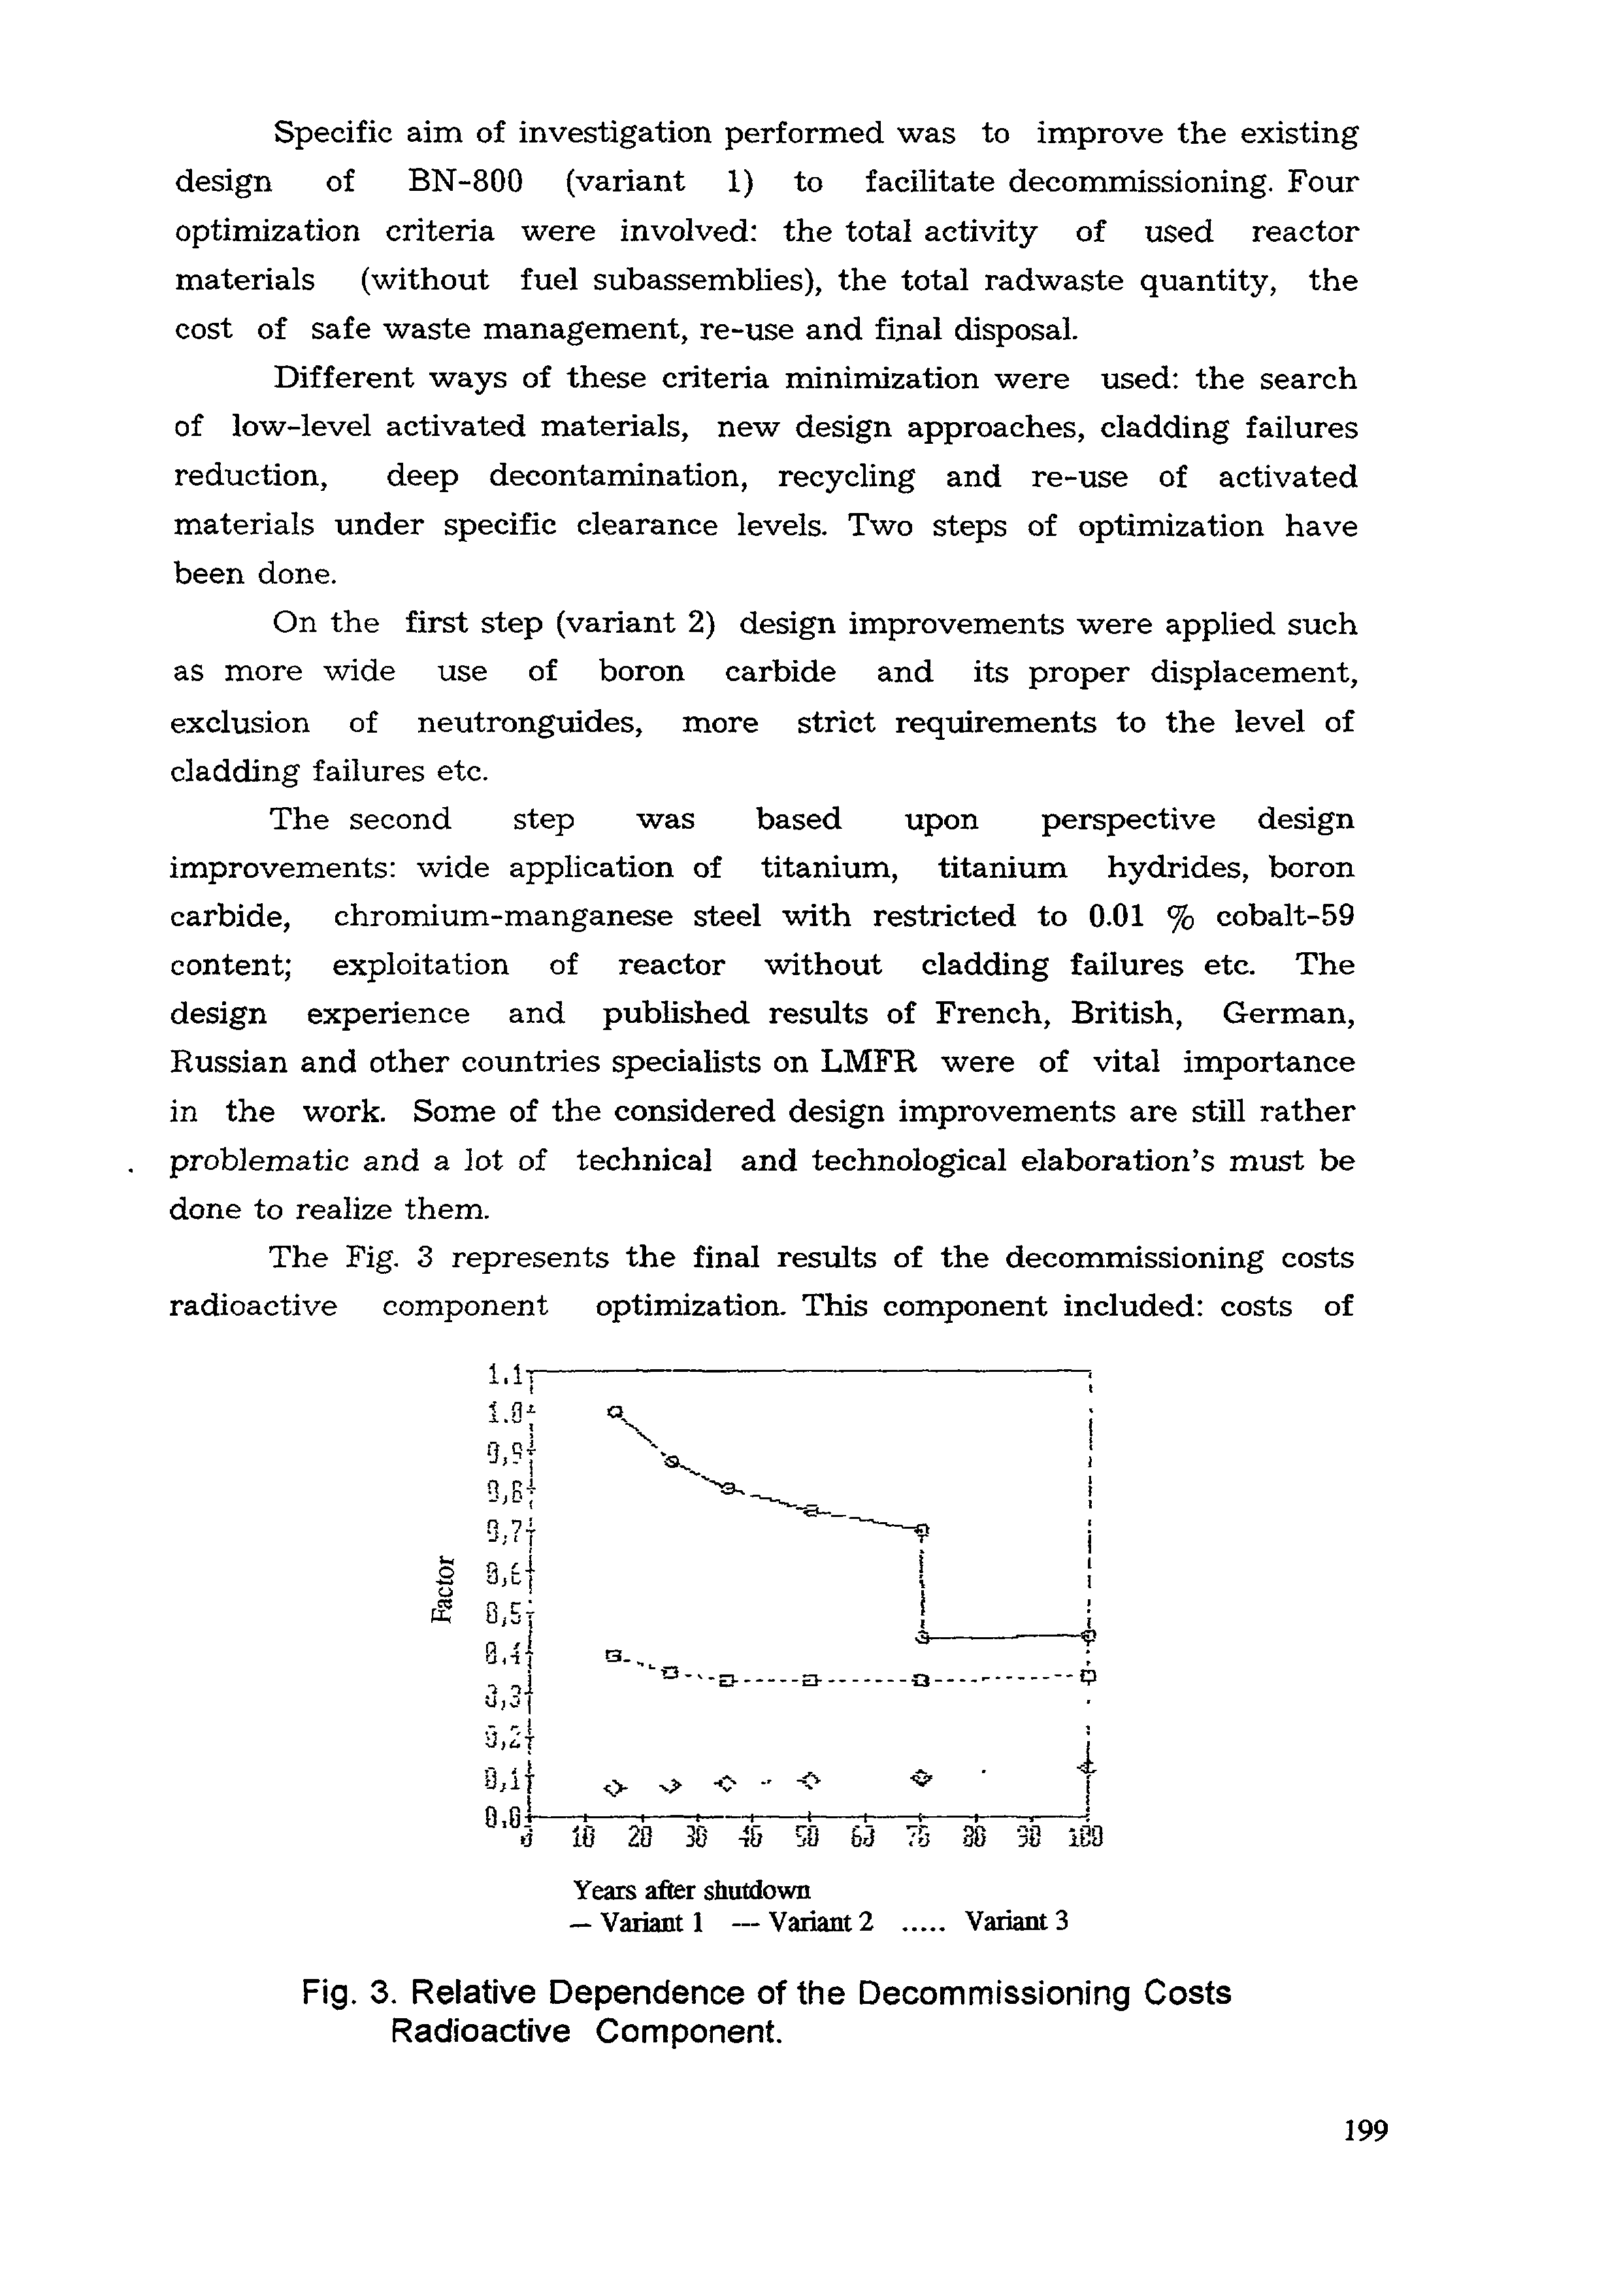 Fig. 3. Relative Dependence of the Decommissioning Costs Radioactive Component.